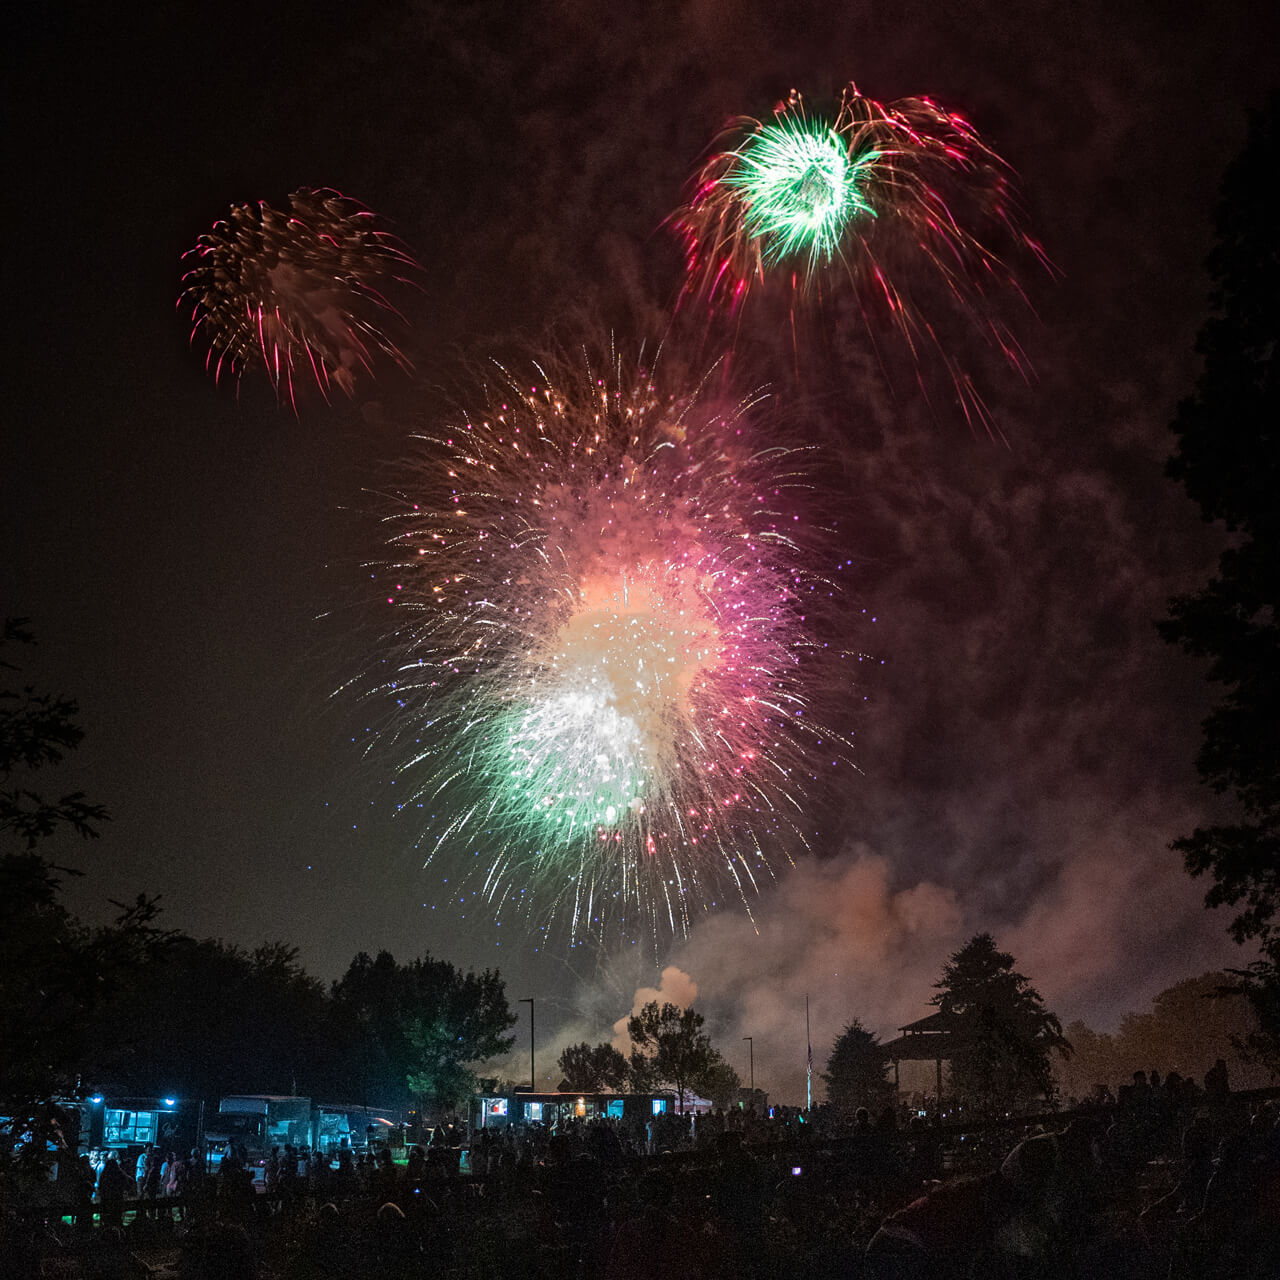 Several colorful fireworks explode in the Hamden night sky